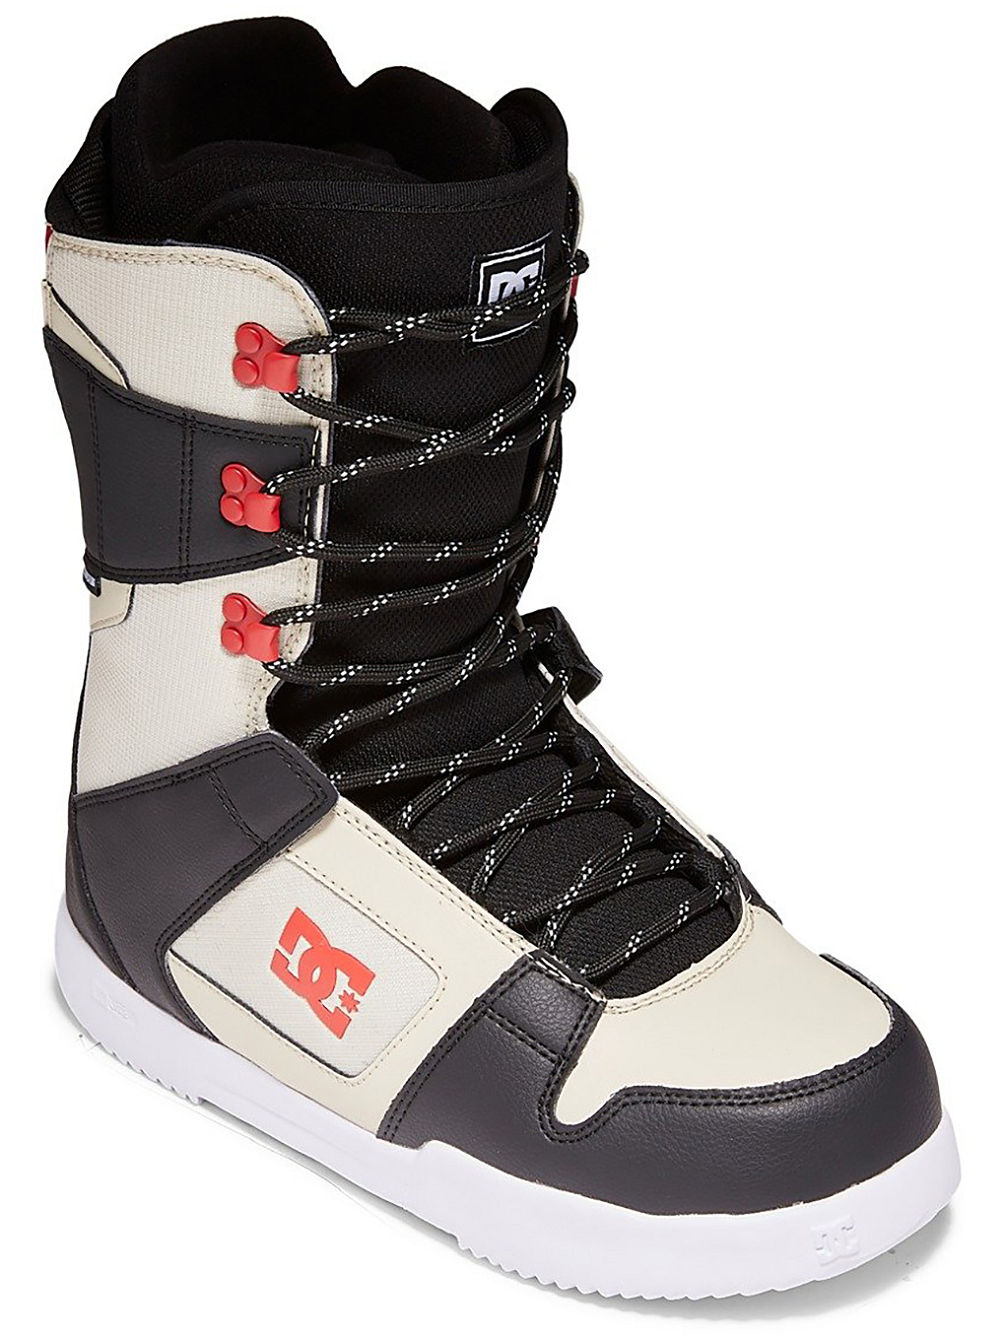 Phase 2022 Snowboard Boots